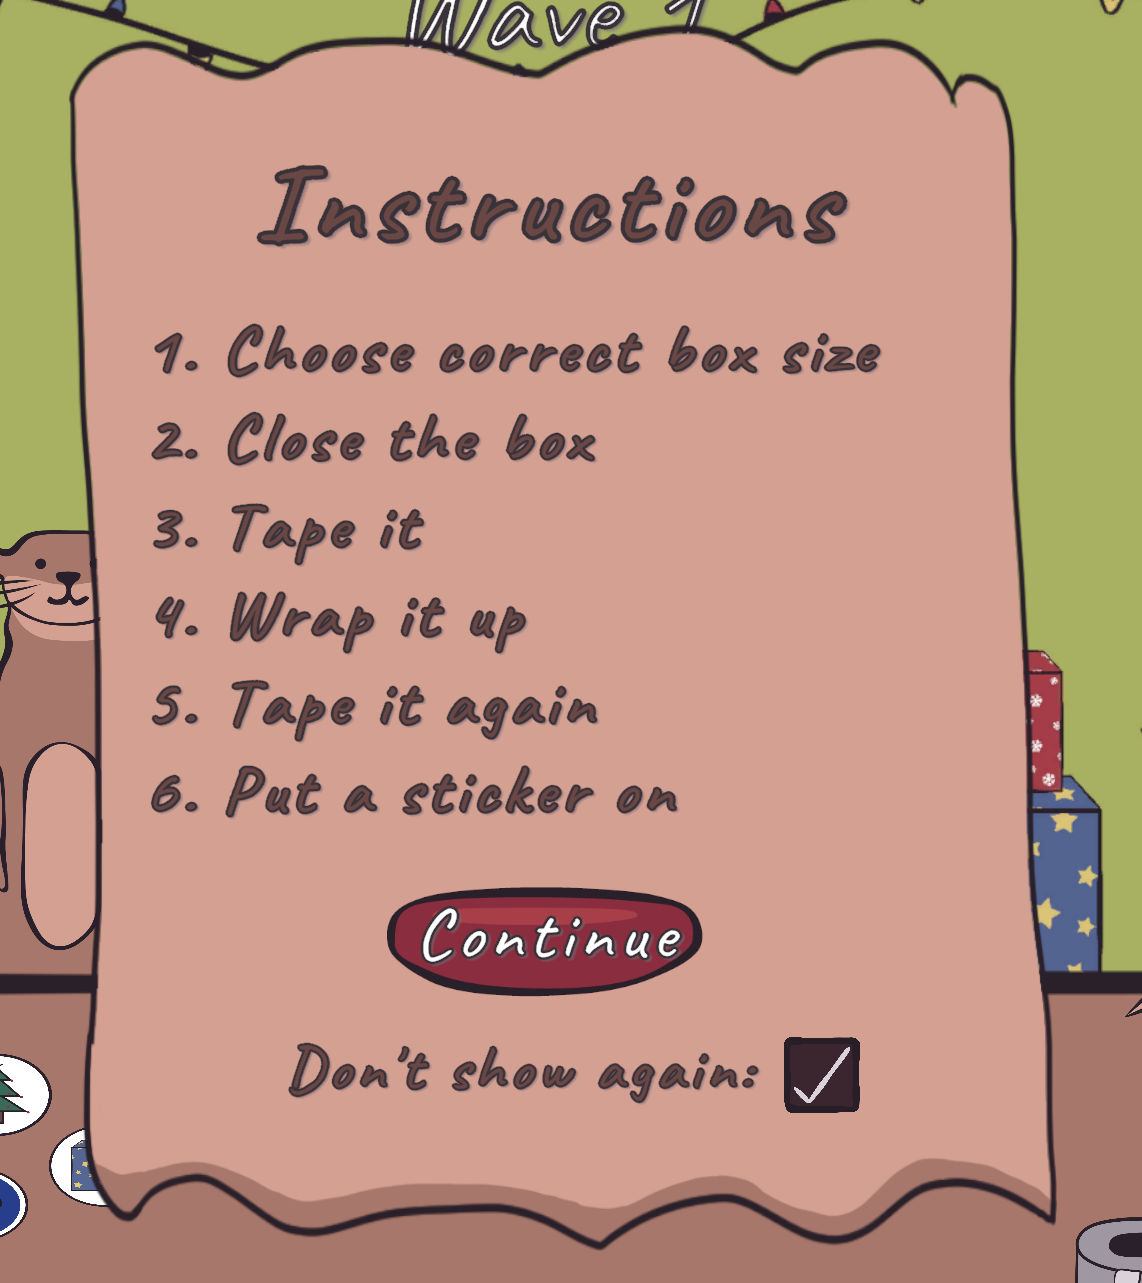 The instructions page